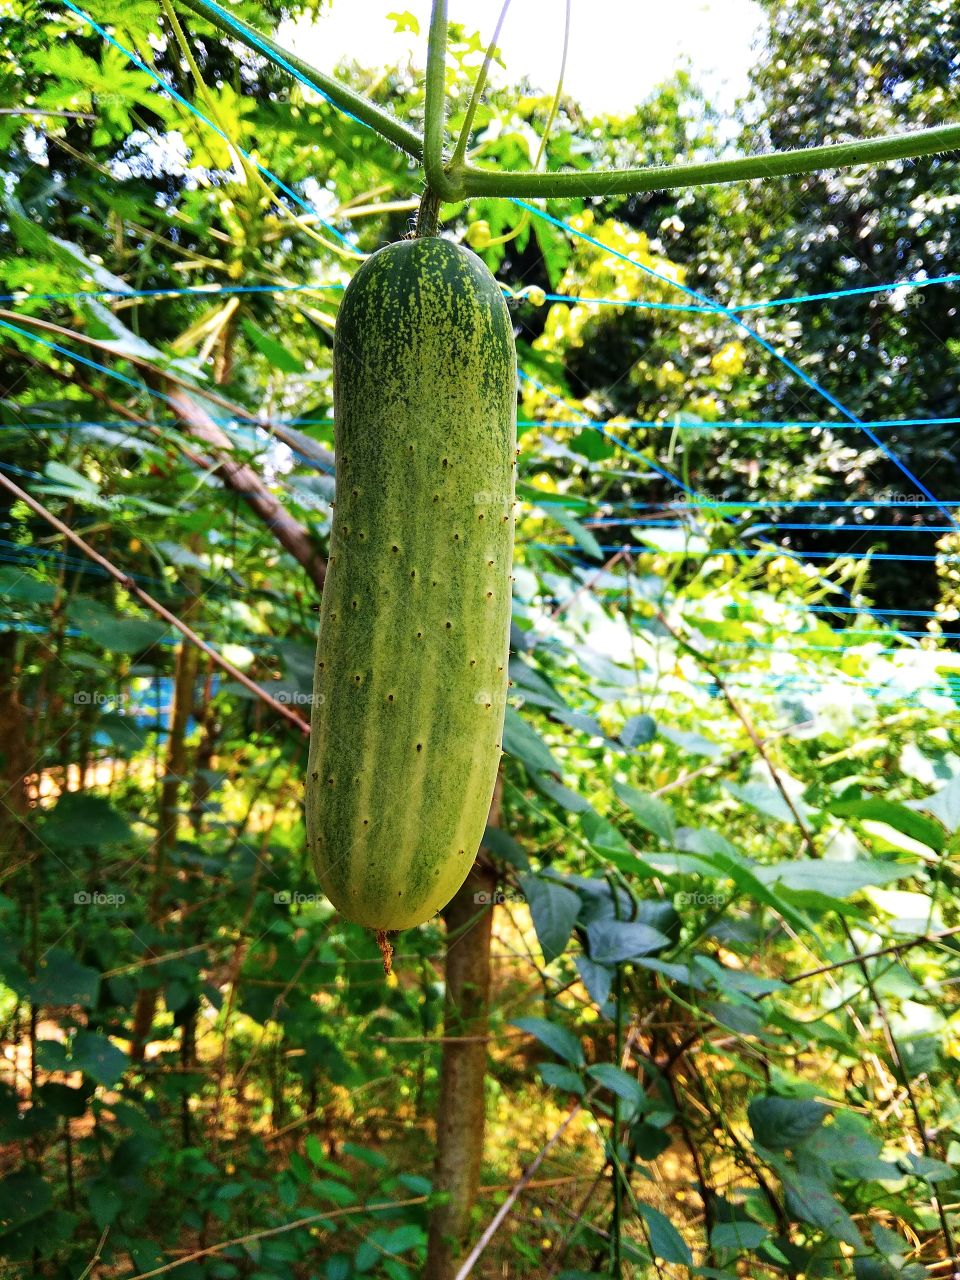 Cucumber is ready to eat.